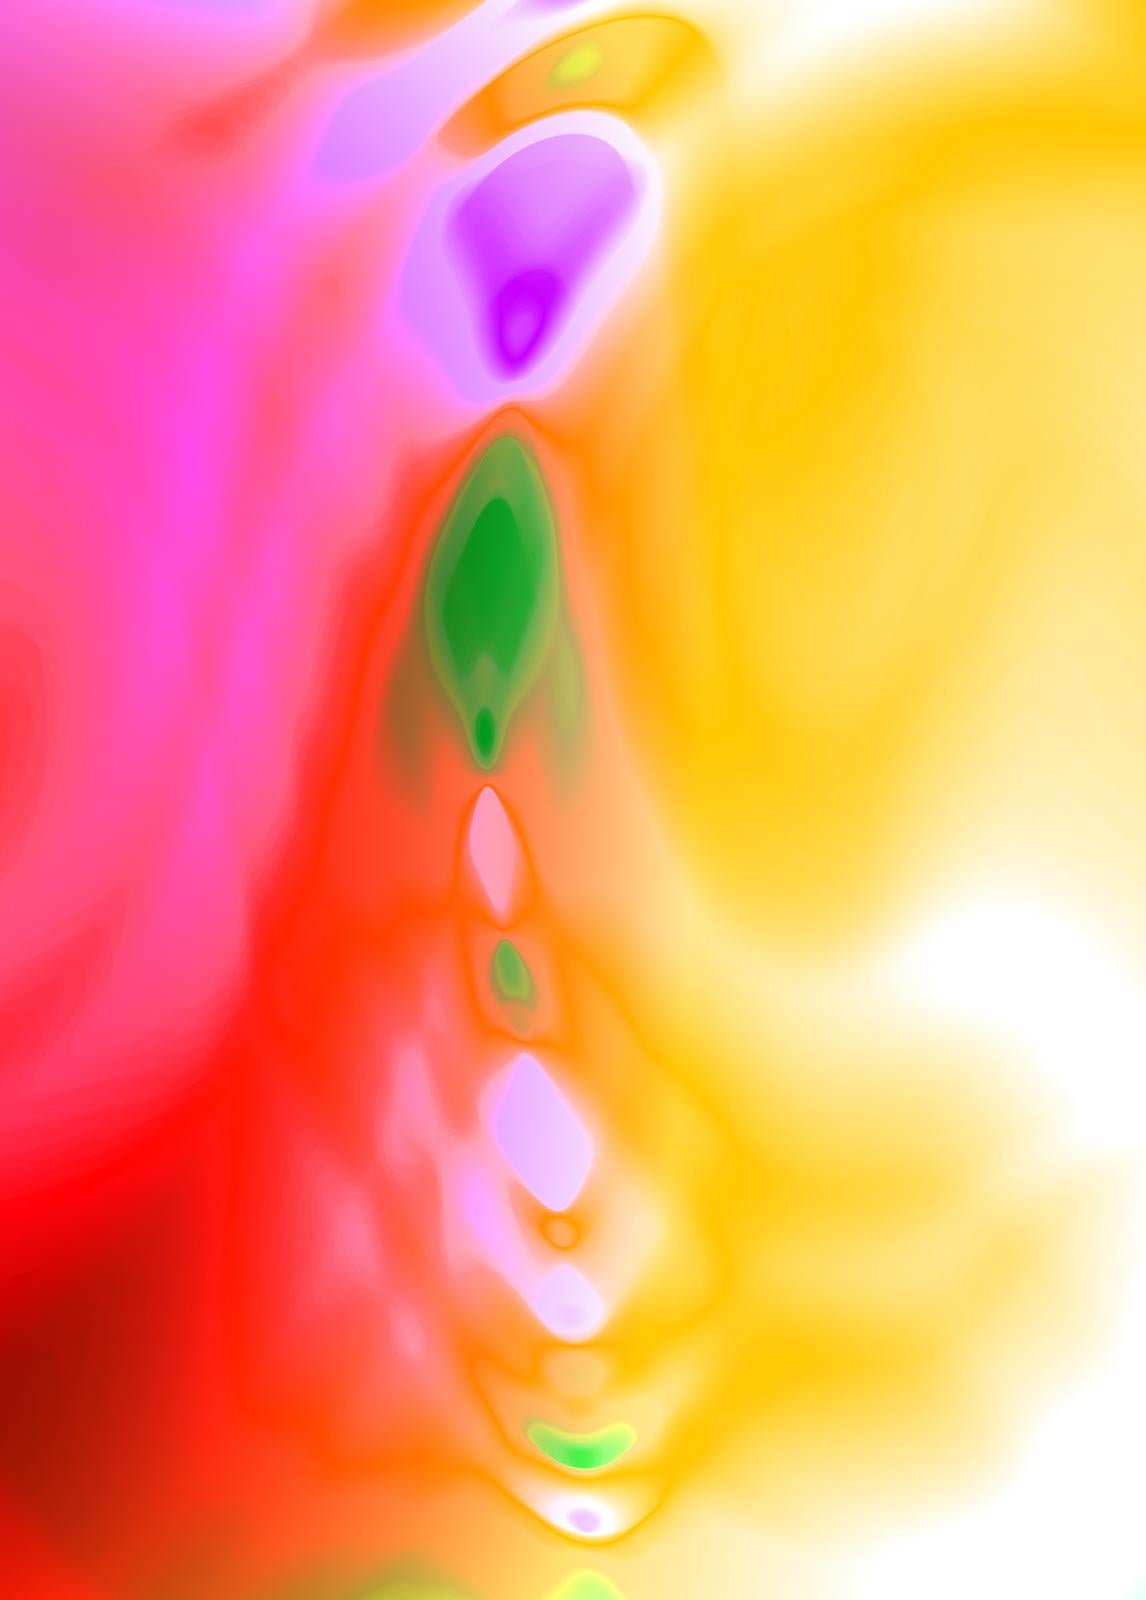 Bright star 9 -Signed limited edition abstract pigment print, Color square photo - Photograph by Michael Banks